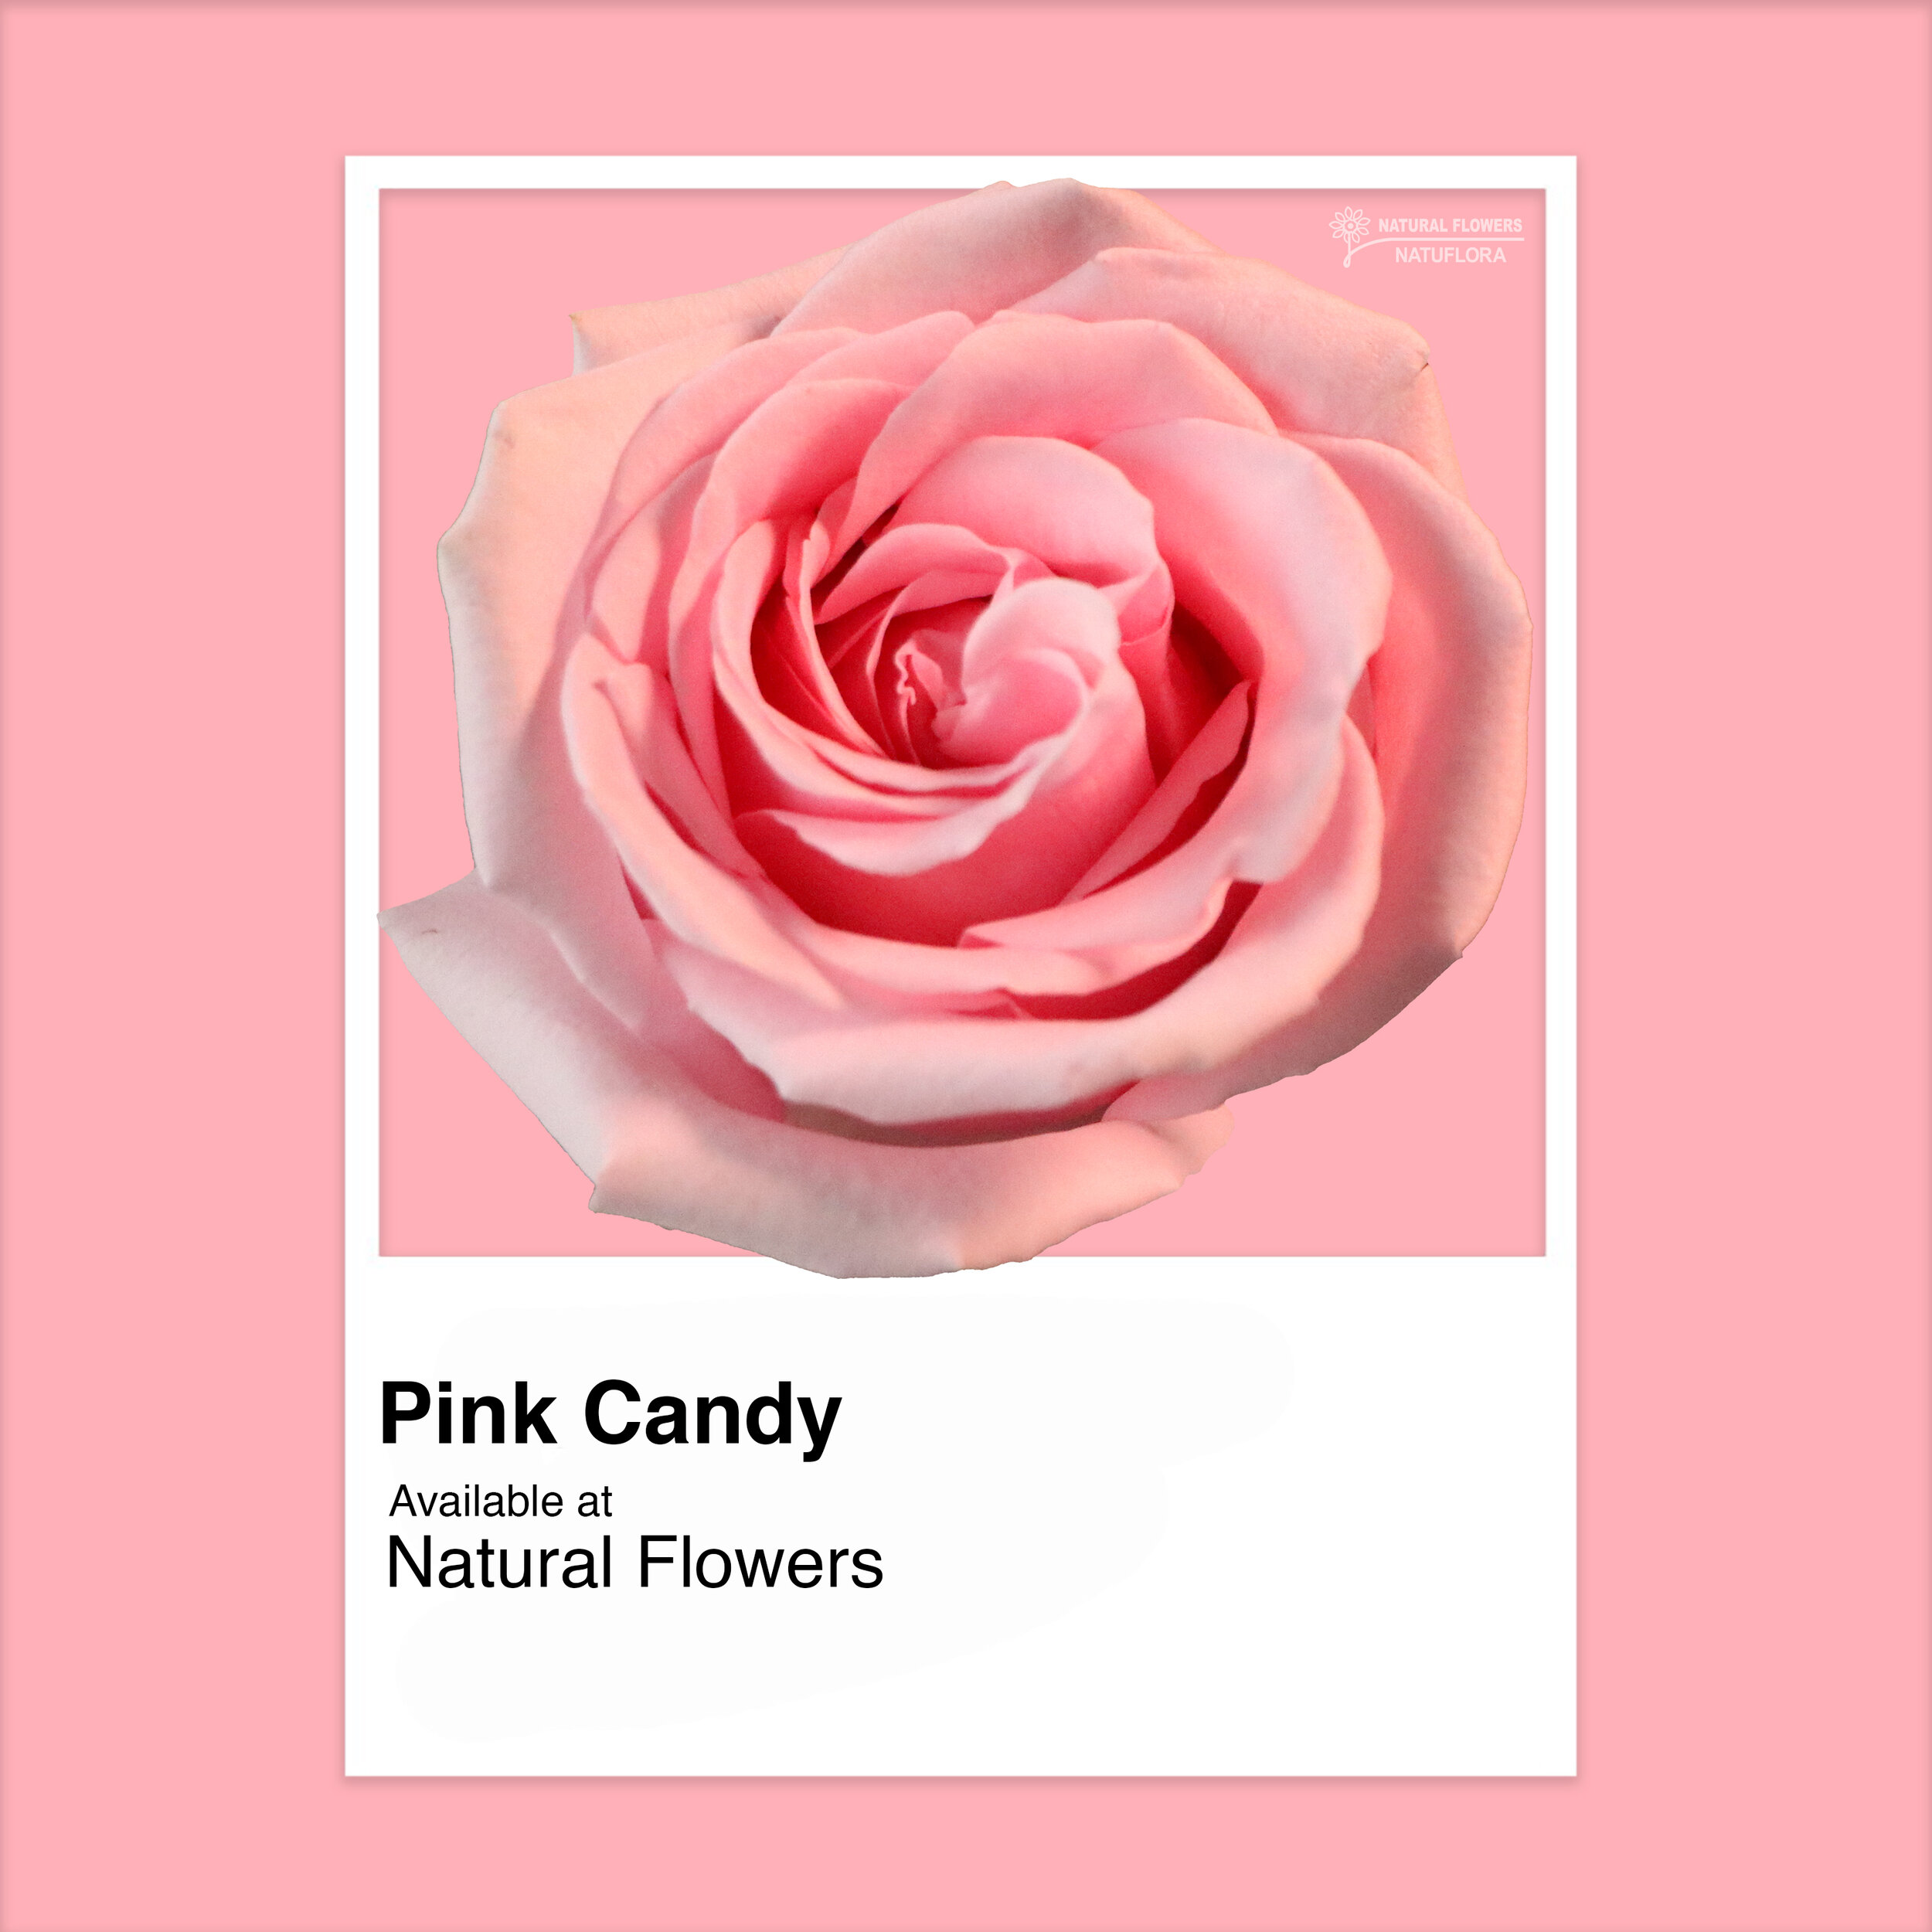 Roses - Pink Candy.jpg